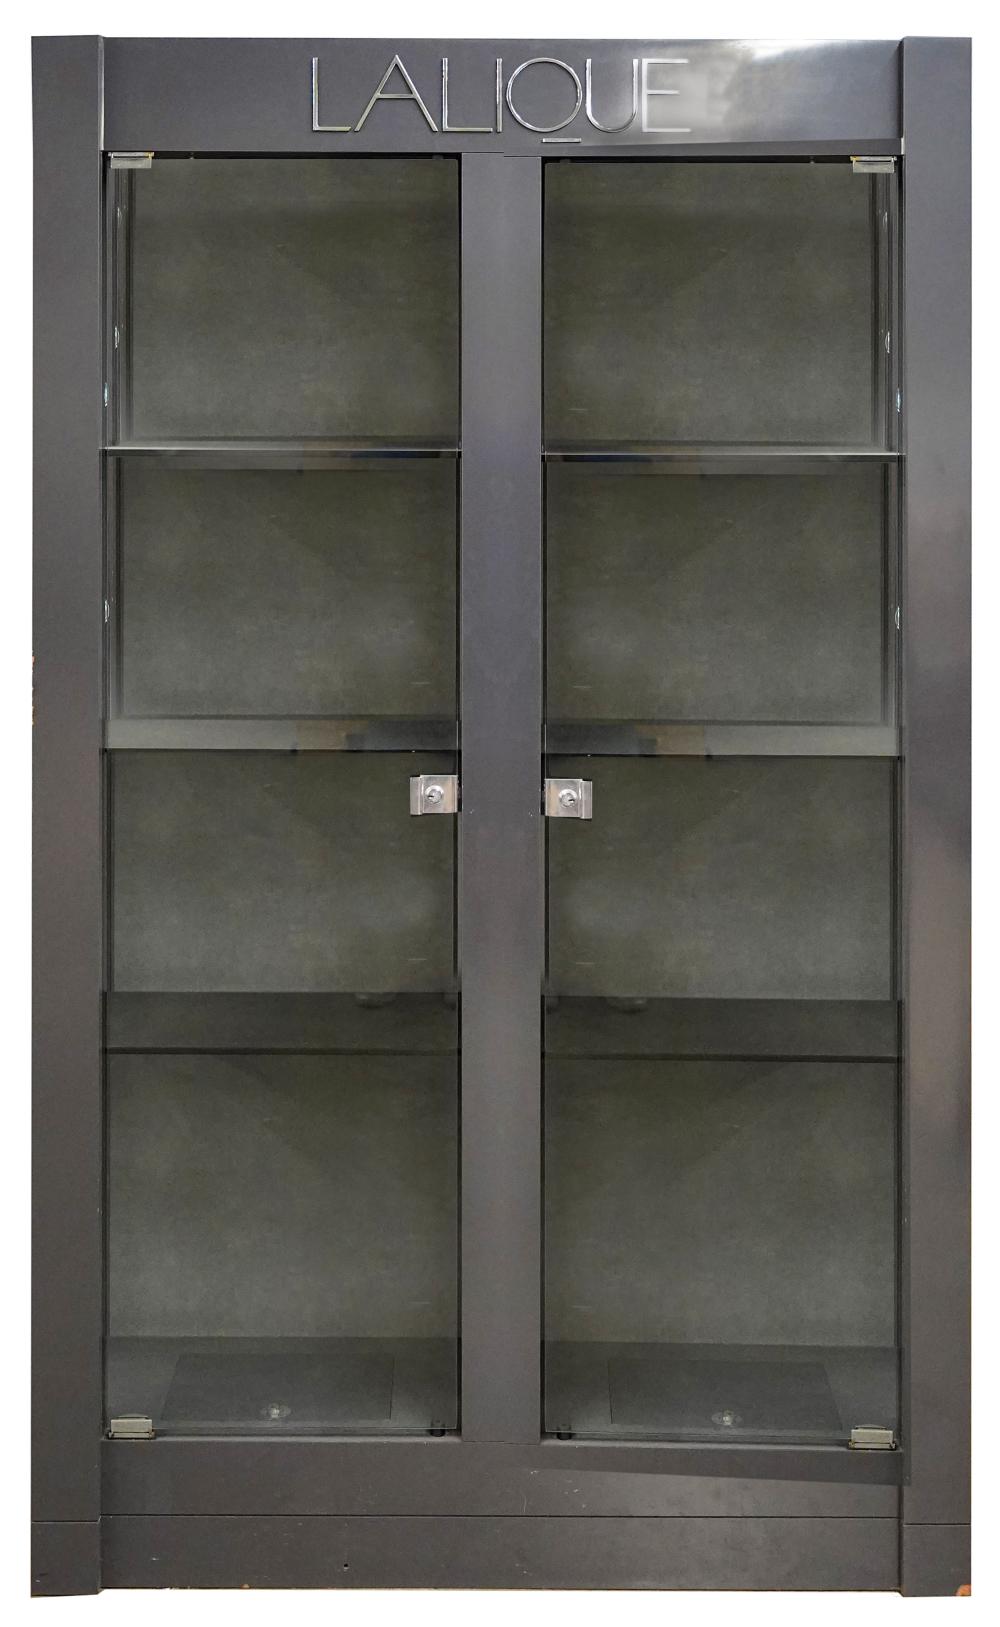 LALIQUE DISPLAY CABINETgrey-painted